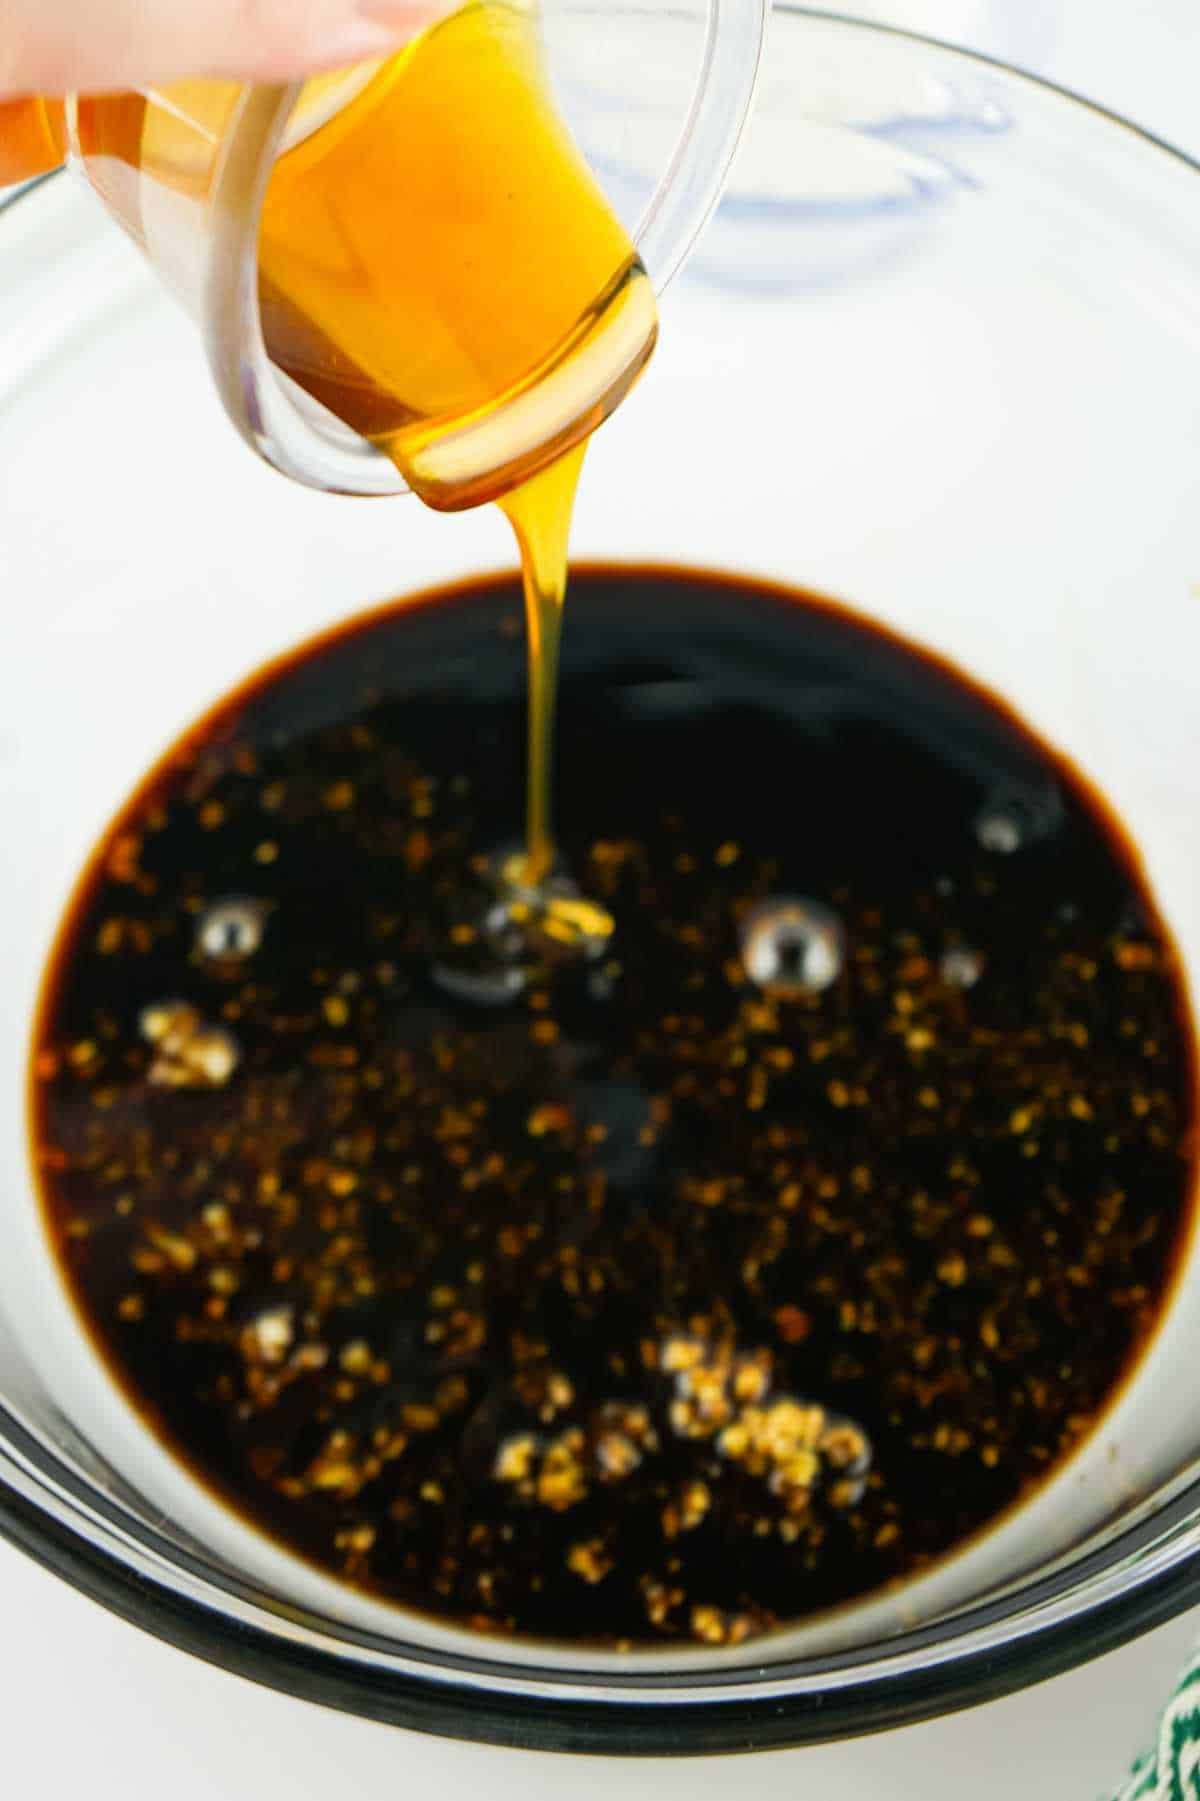 honey added to bowl of soy.